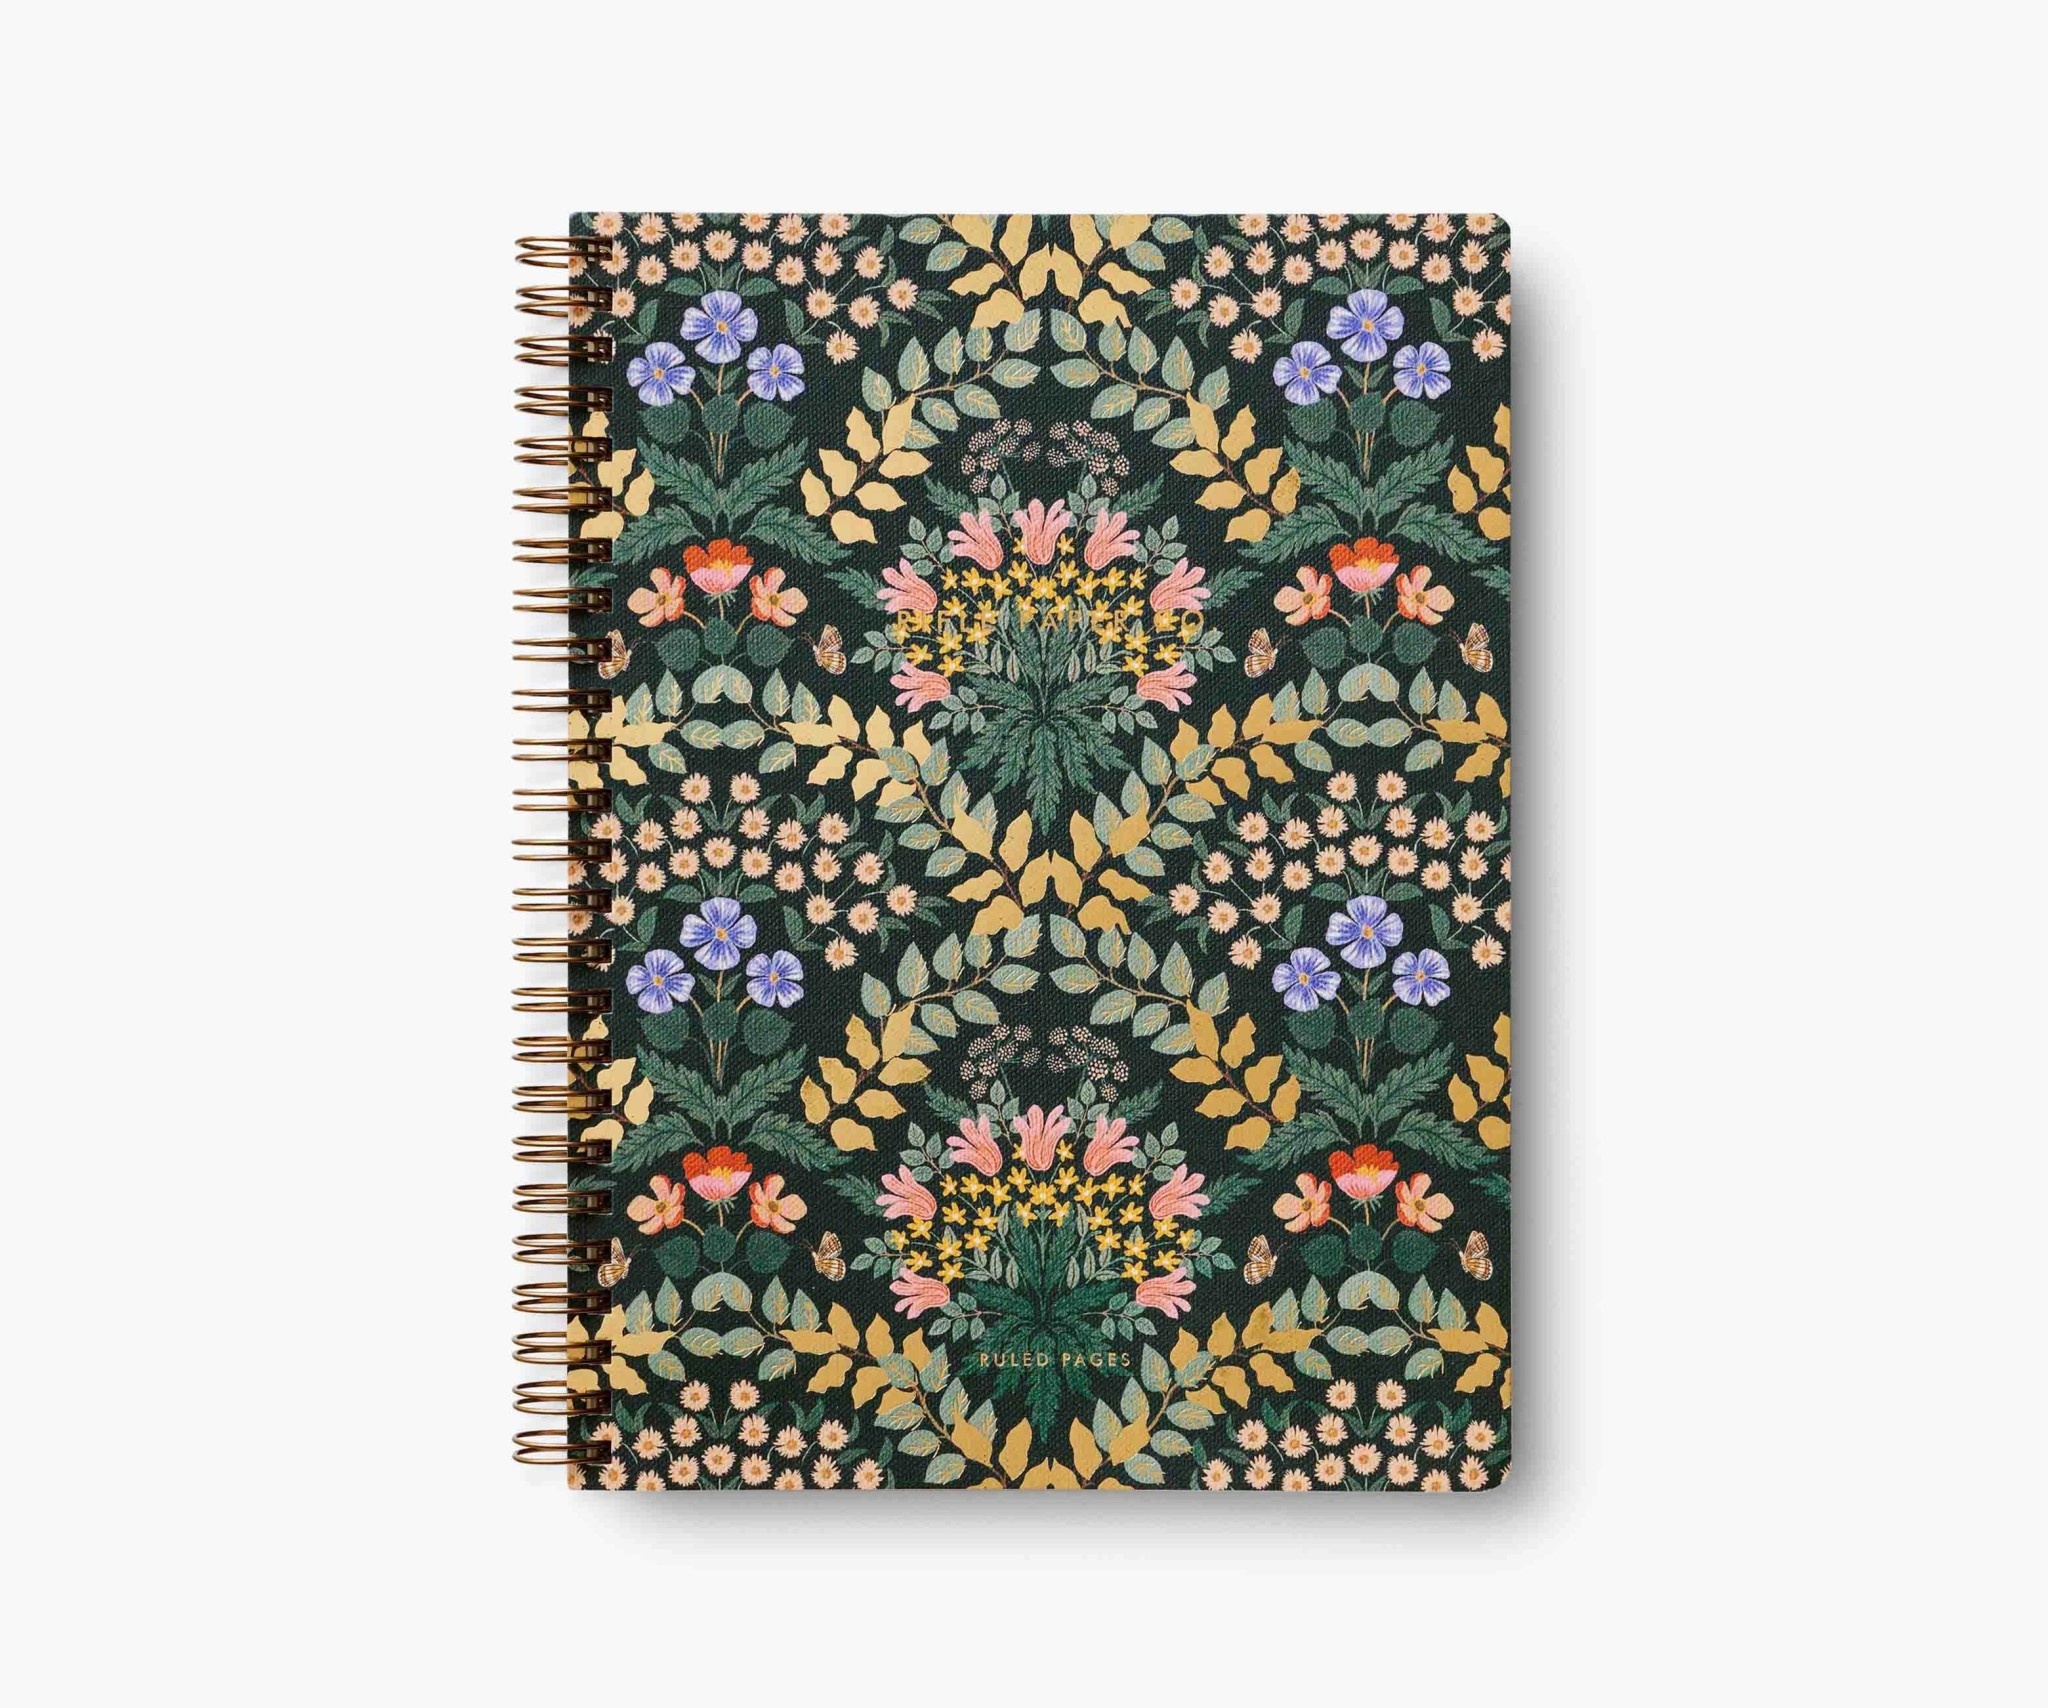 Rifle Paper Co - RP Rifle Paper Co - Bramble Trellis Spiral Notebook, Lined